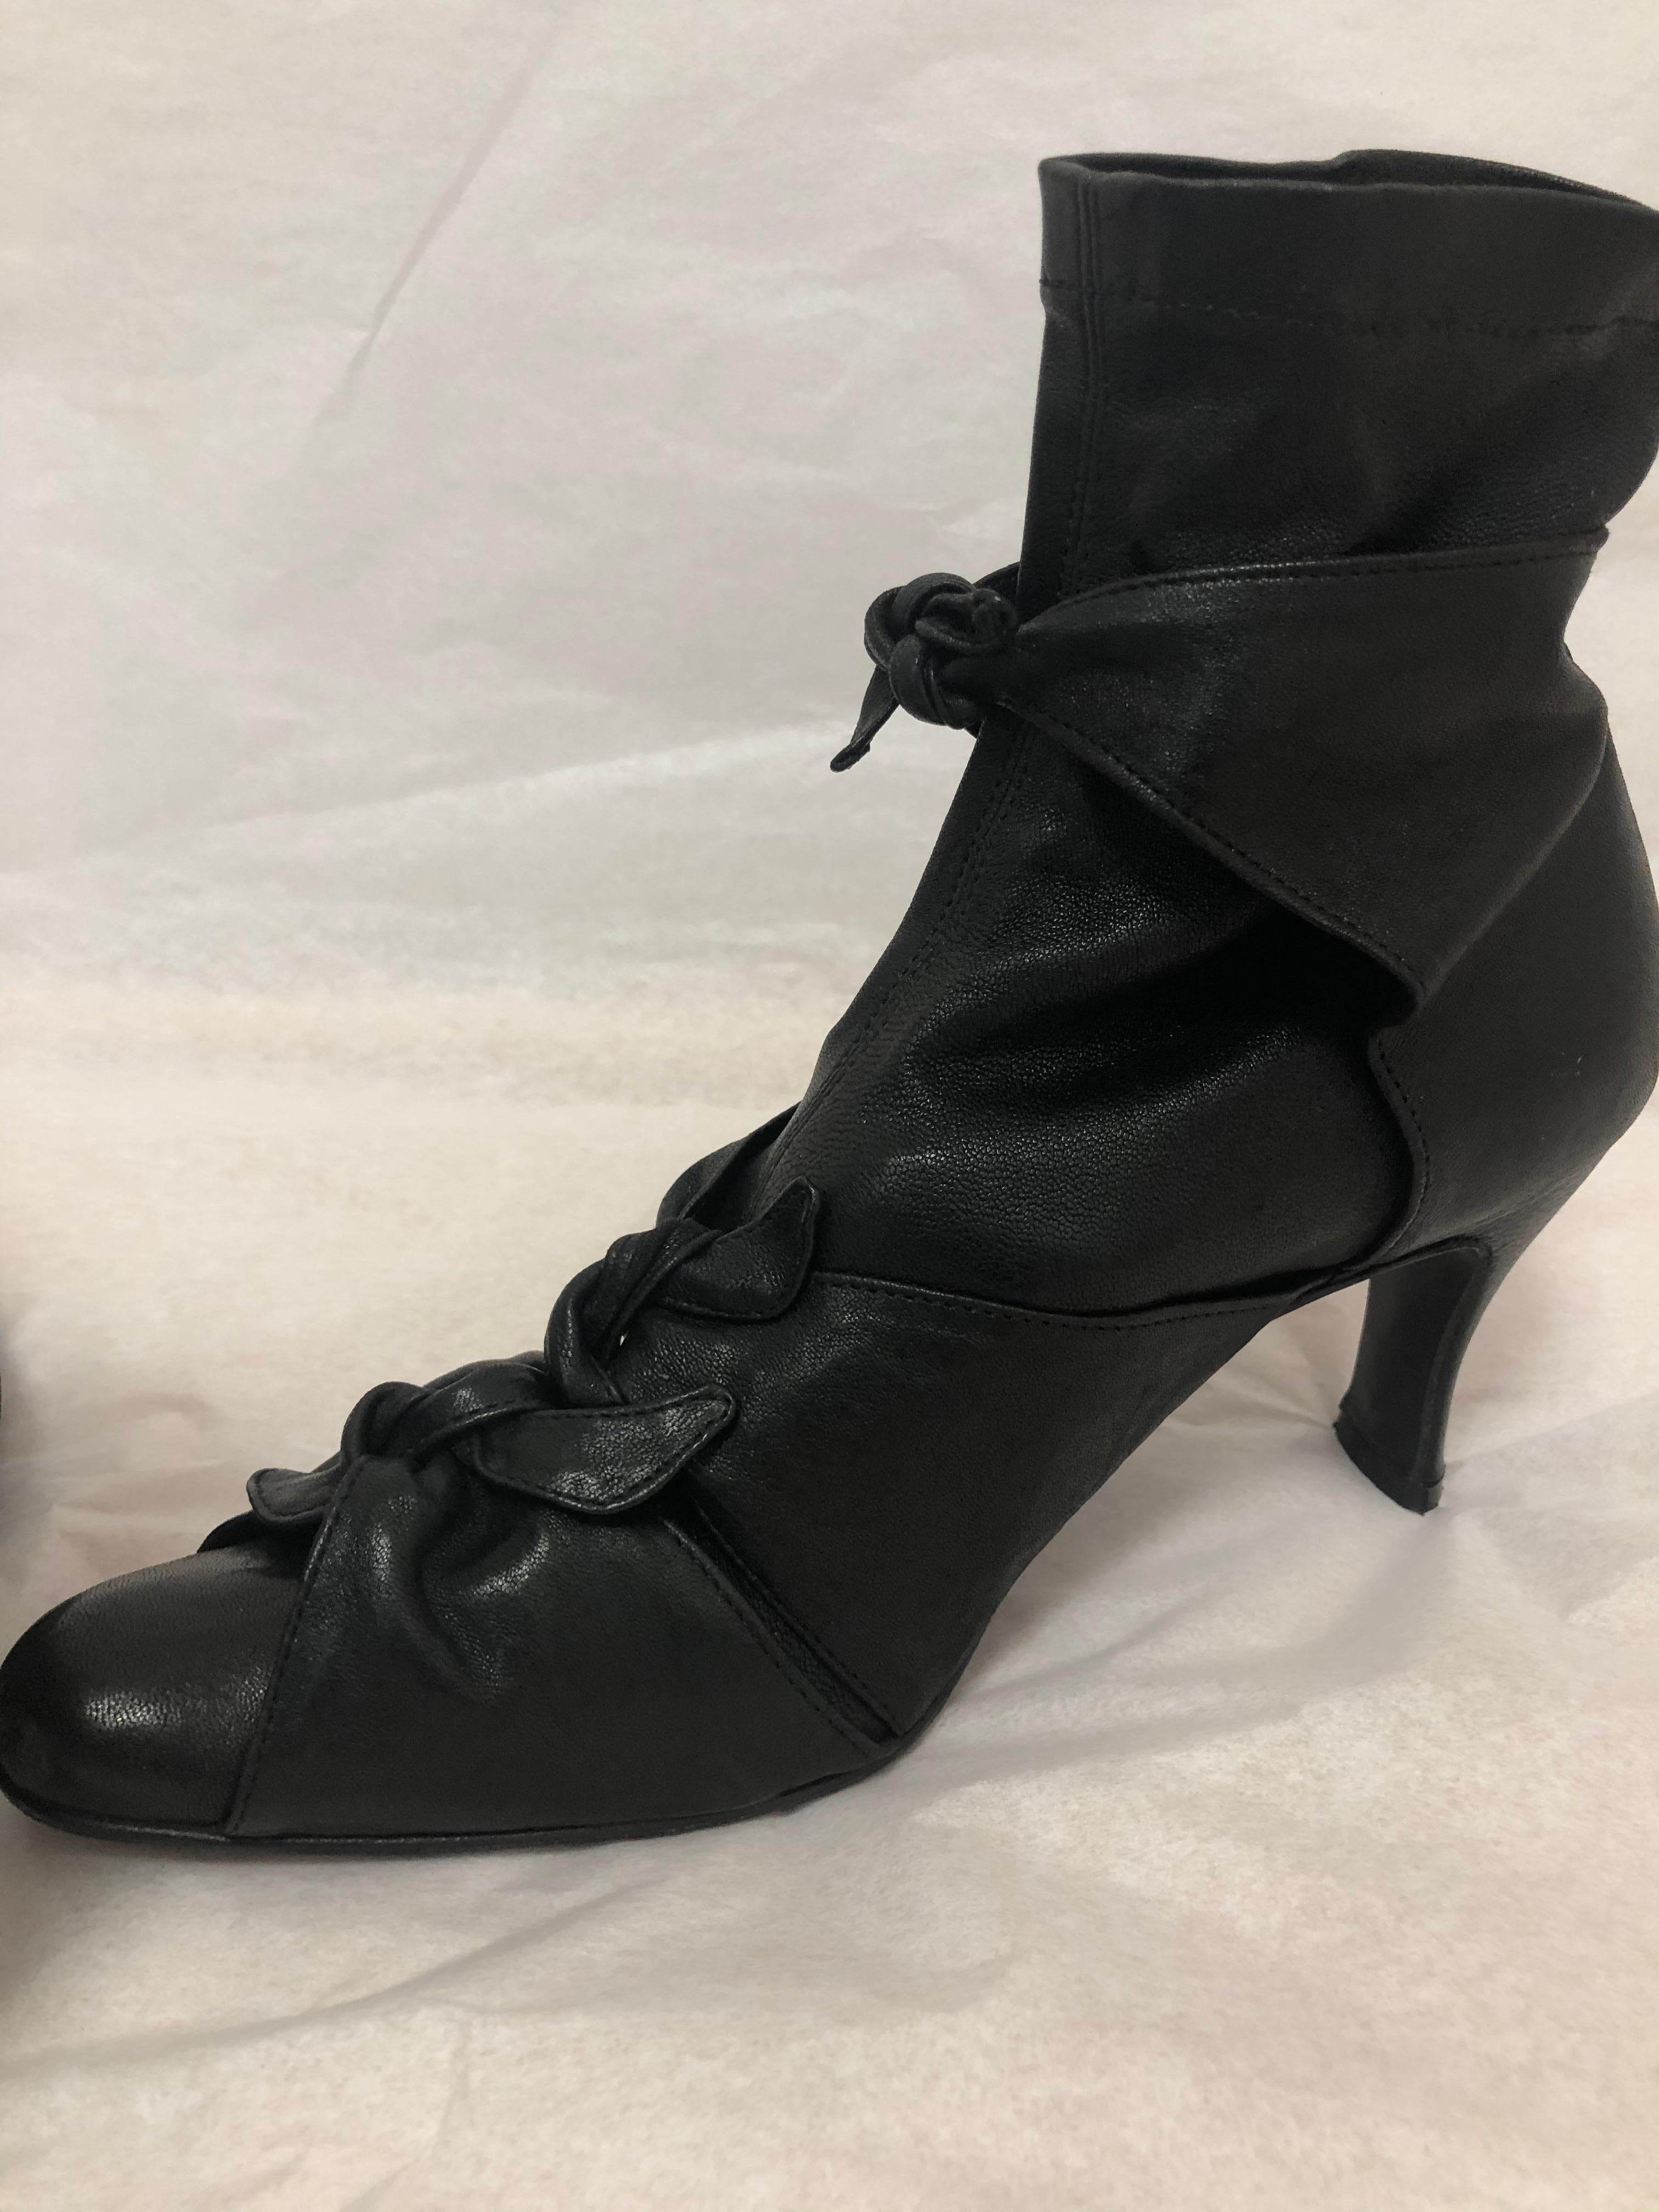 Buttery soft leather Gigli booties with three adjustable bow wraps. Absolutely gorgeous and in great condition. 2